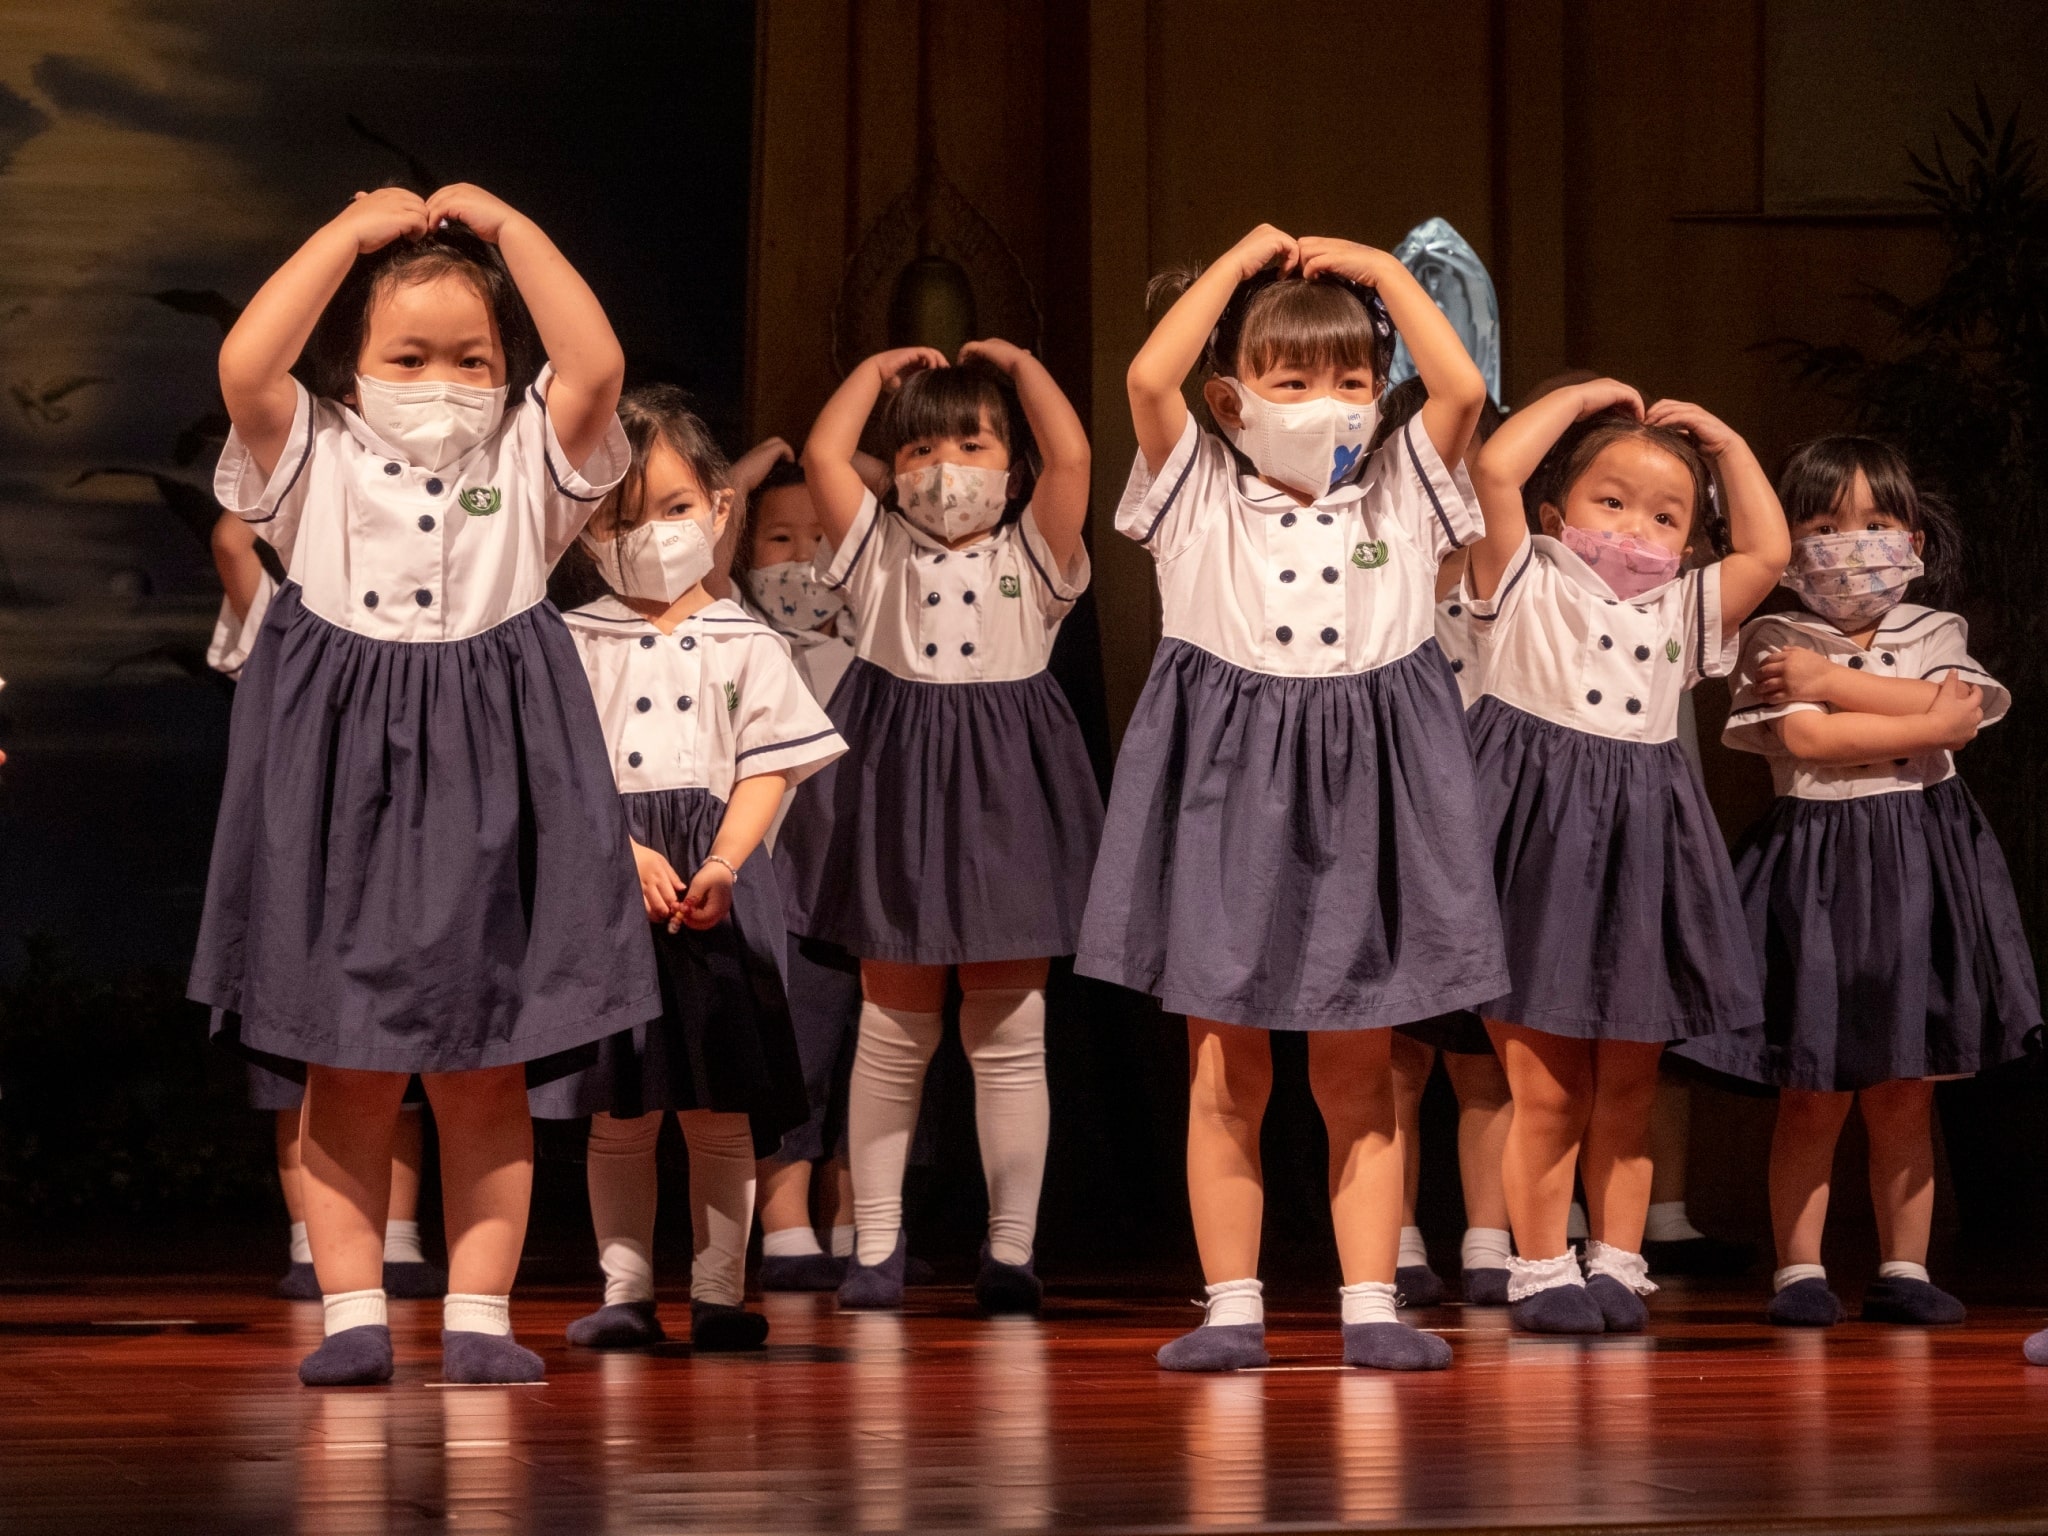 Preschool students performed the song “Mama, I love you” to express gratitude to their mother. 【Photo by Matt Serrano】